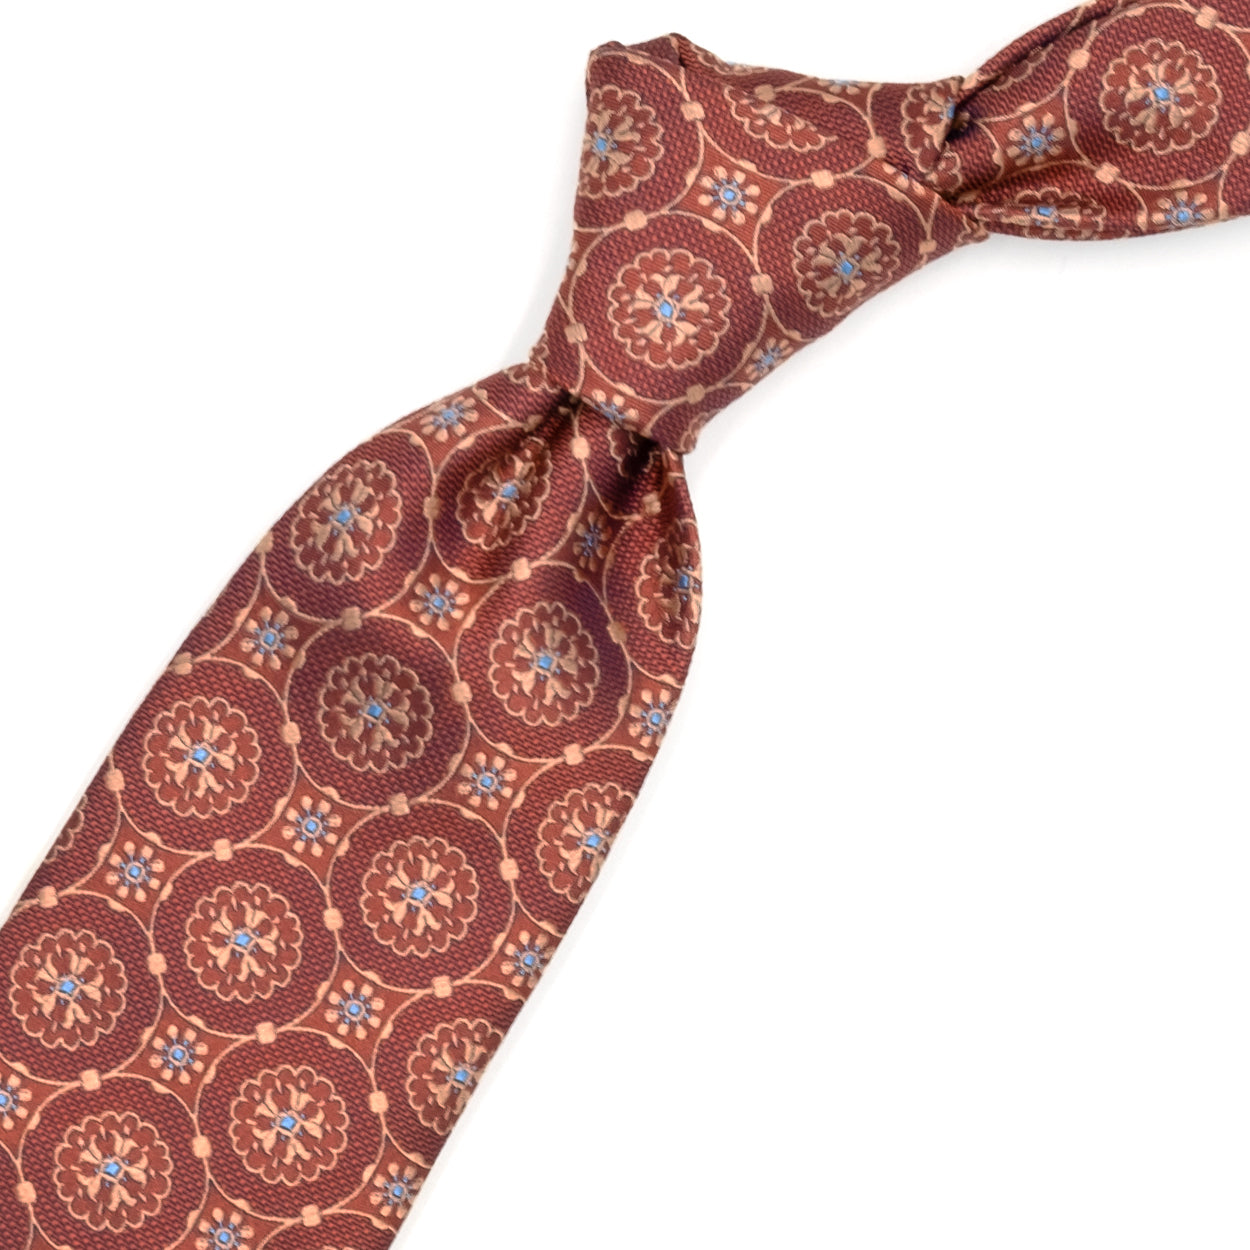 Orange tie with tone-on-tone medallions and blue dots